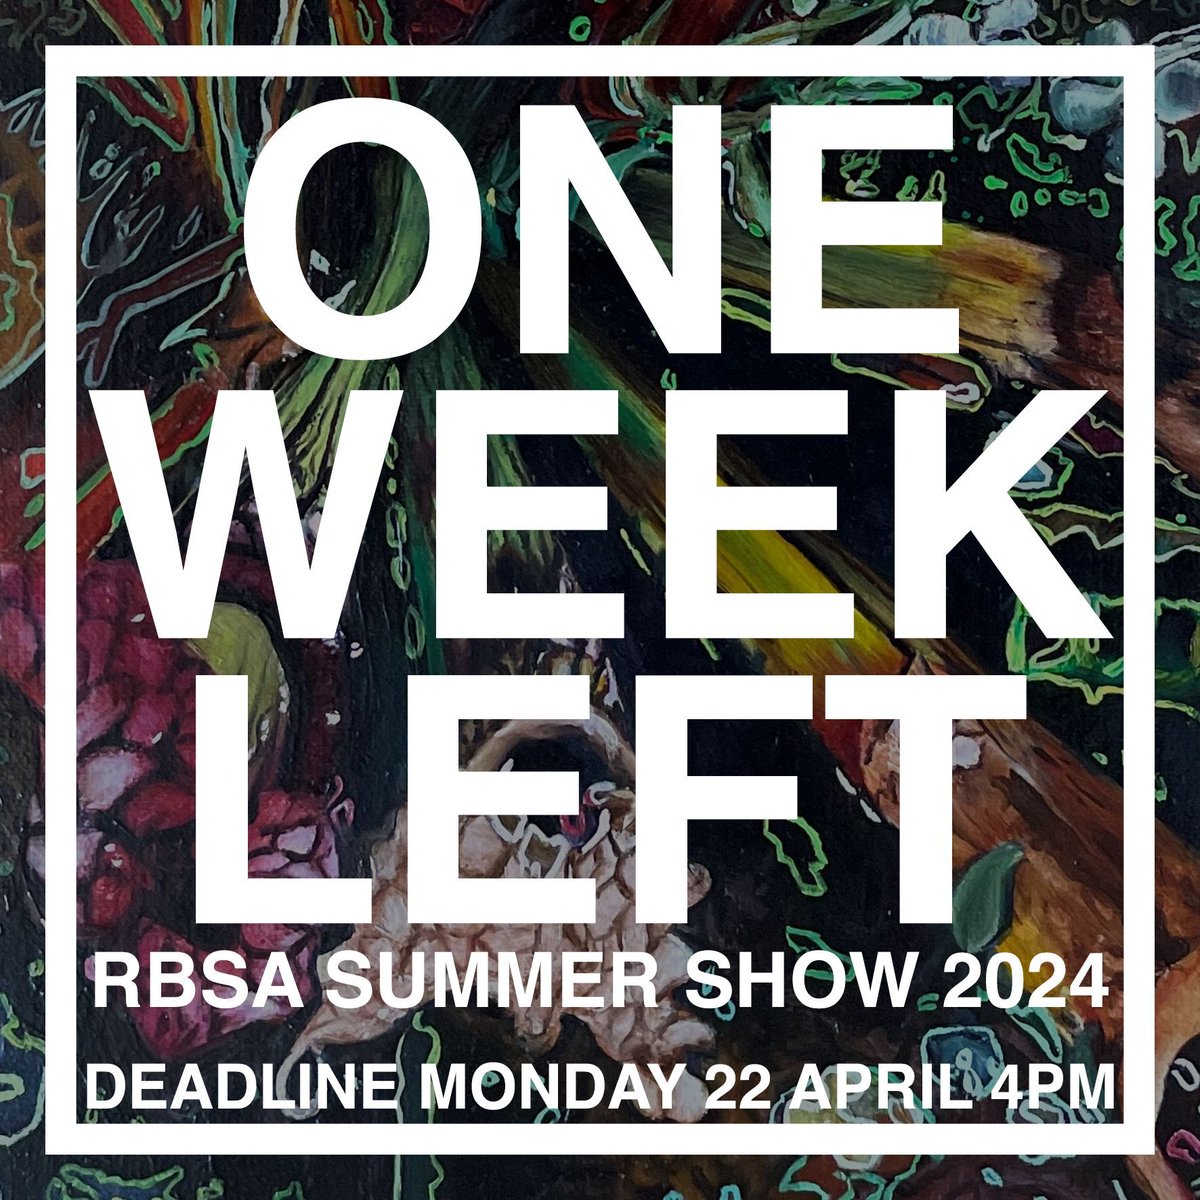 Call for entries - RBSA Summer Show 2024! There is only one week left to submit your work for the RBSA Summer Show 2024! Artists may enter up to three works created using any media, both 2D and 3D. Enter via our website bit.ly/4amCZzn Deadline is Monday 22 April.